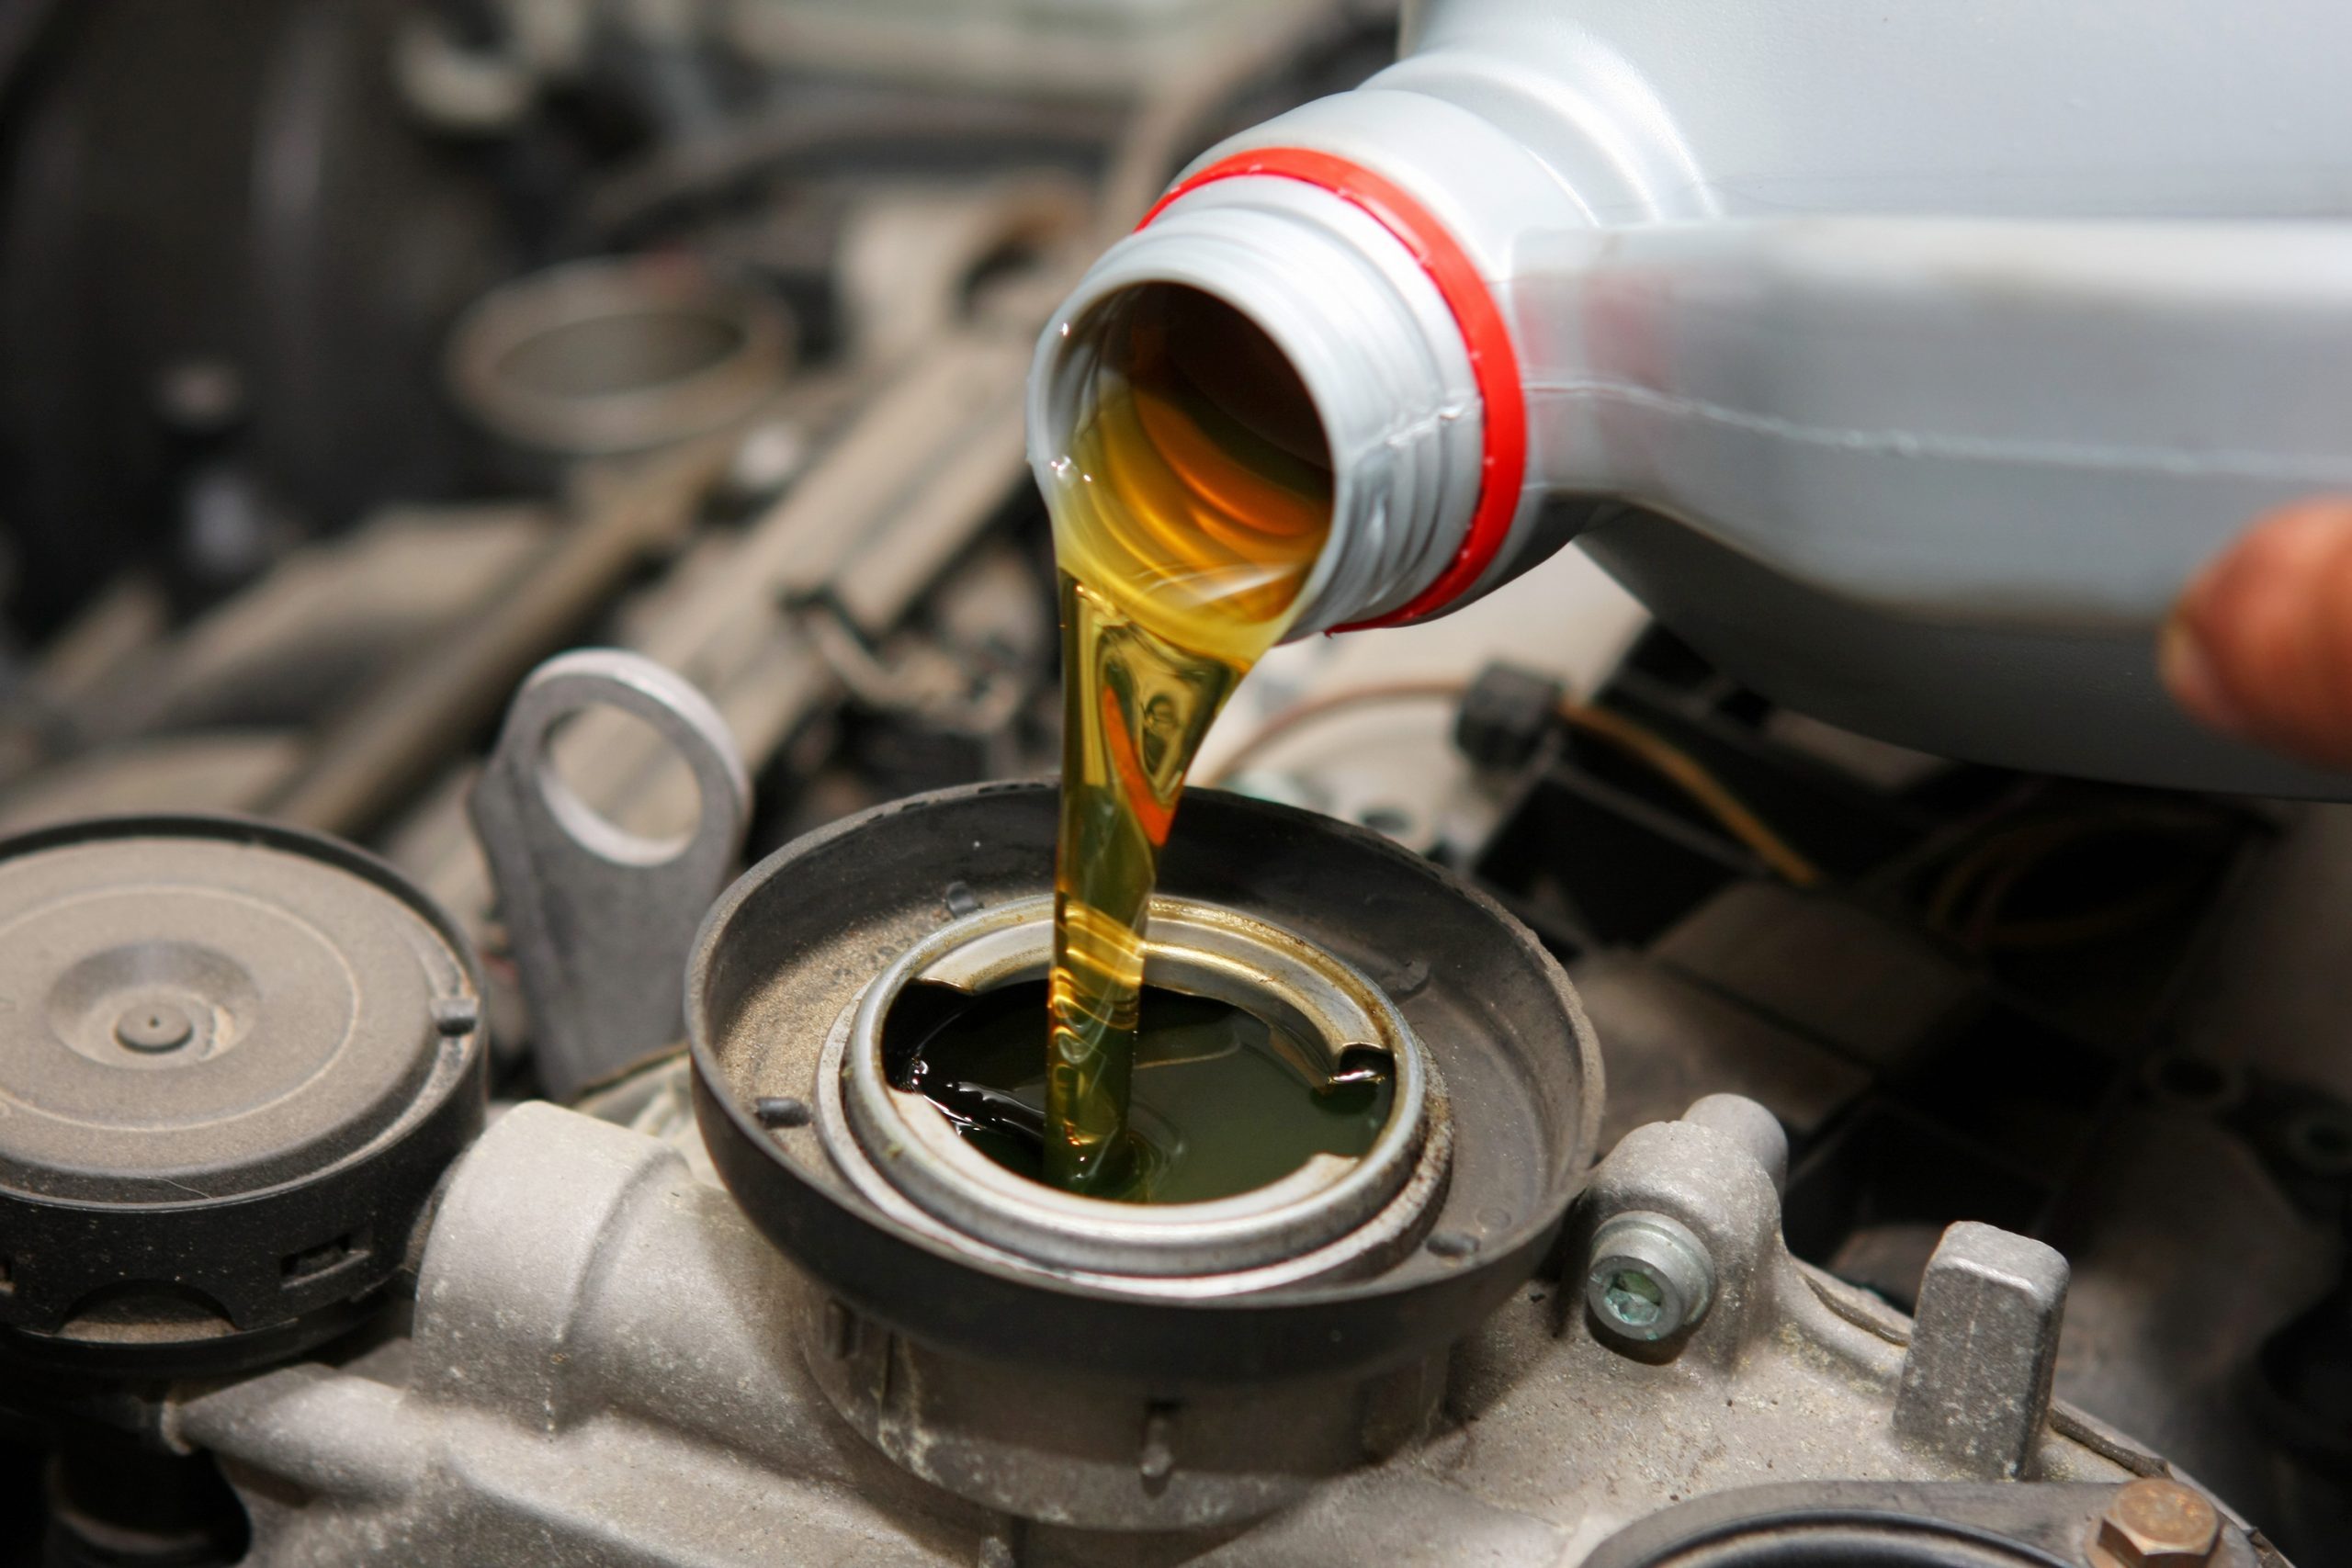 Best Car Oil for Your Vehicle